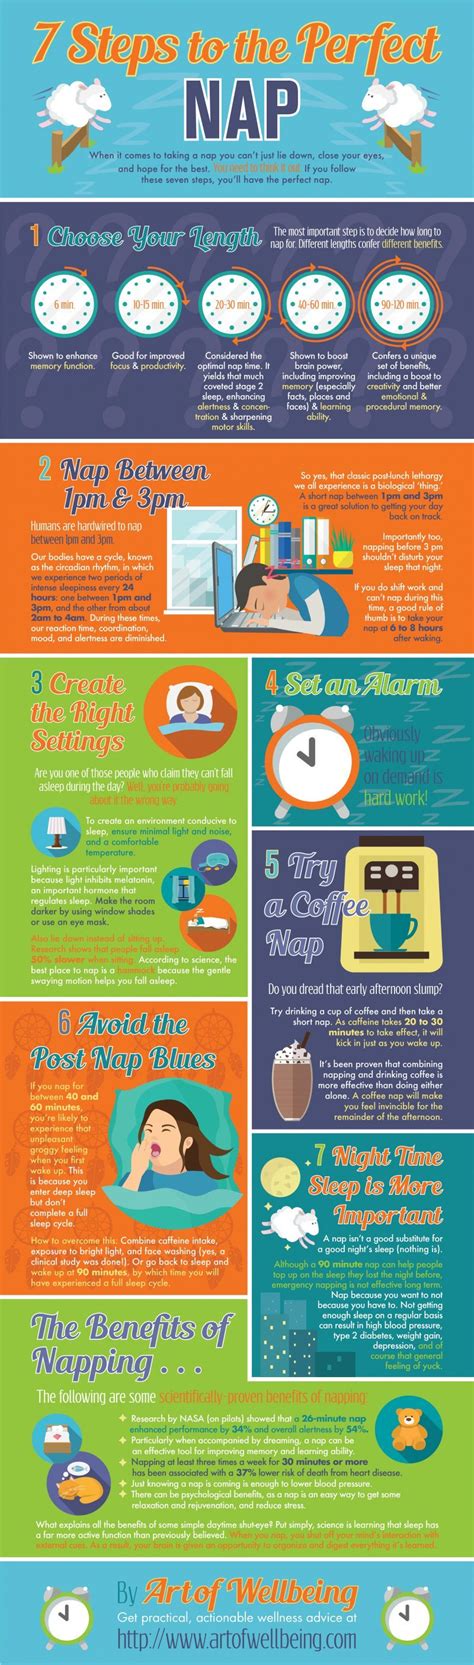 7 steps to the perfect nap infographic